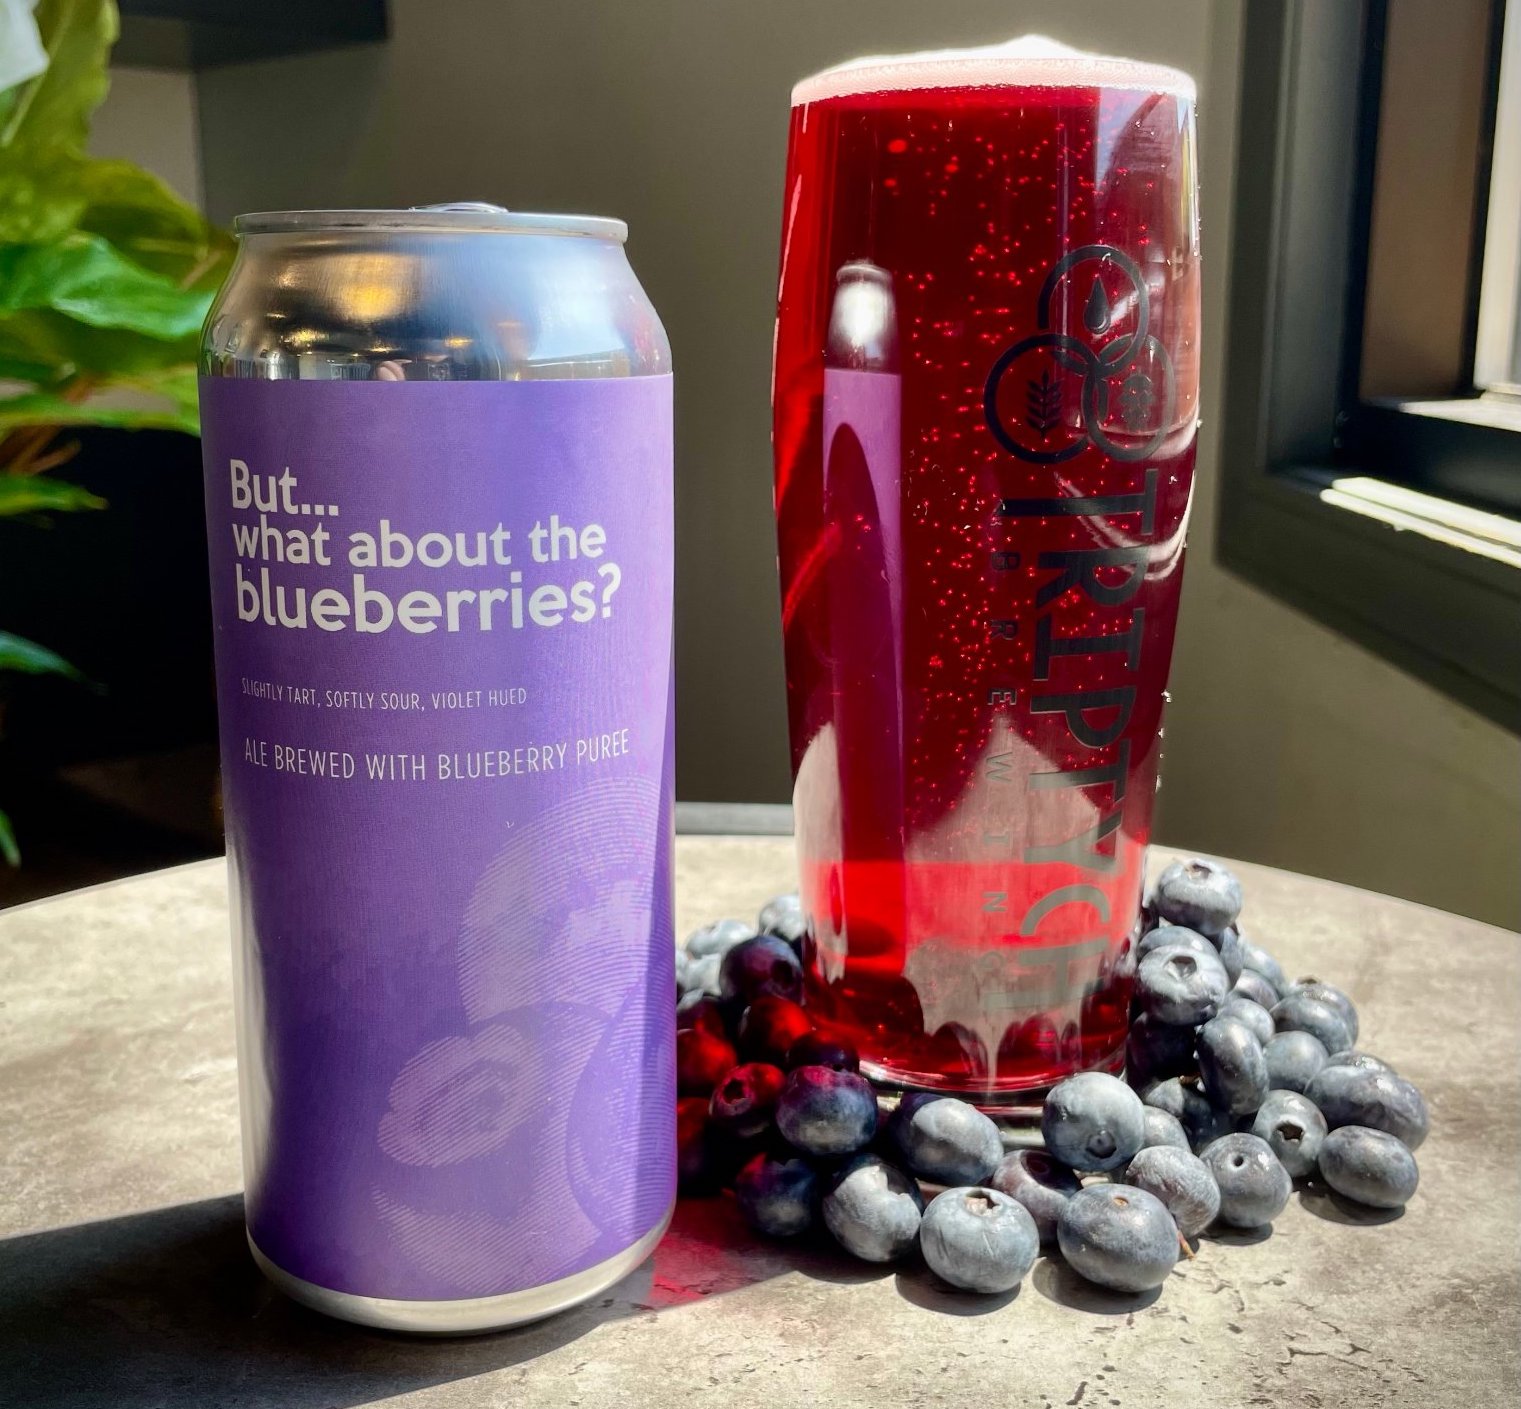 Triptychâ€™s BUTâ€¦WHAT ABOUT THE BLUEBERRIES? beer in a tall, purple can is on a table next to the beer in a tall glass. There are blueberries on the table around the glass. Photo from the Triptych Facebook page.